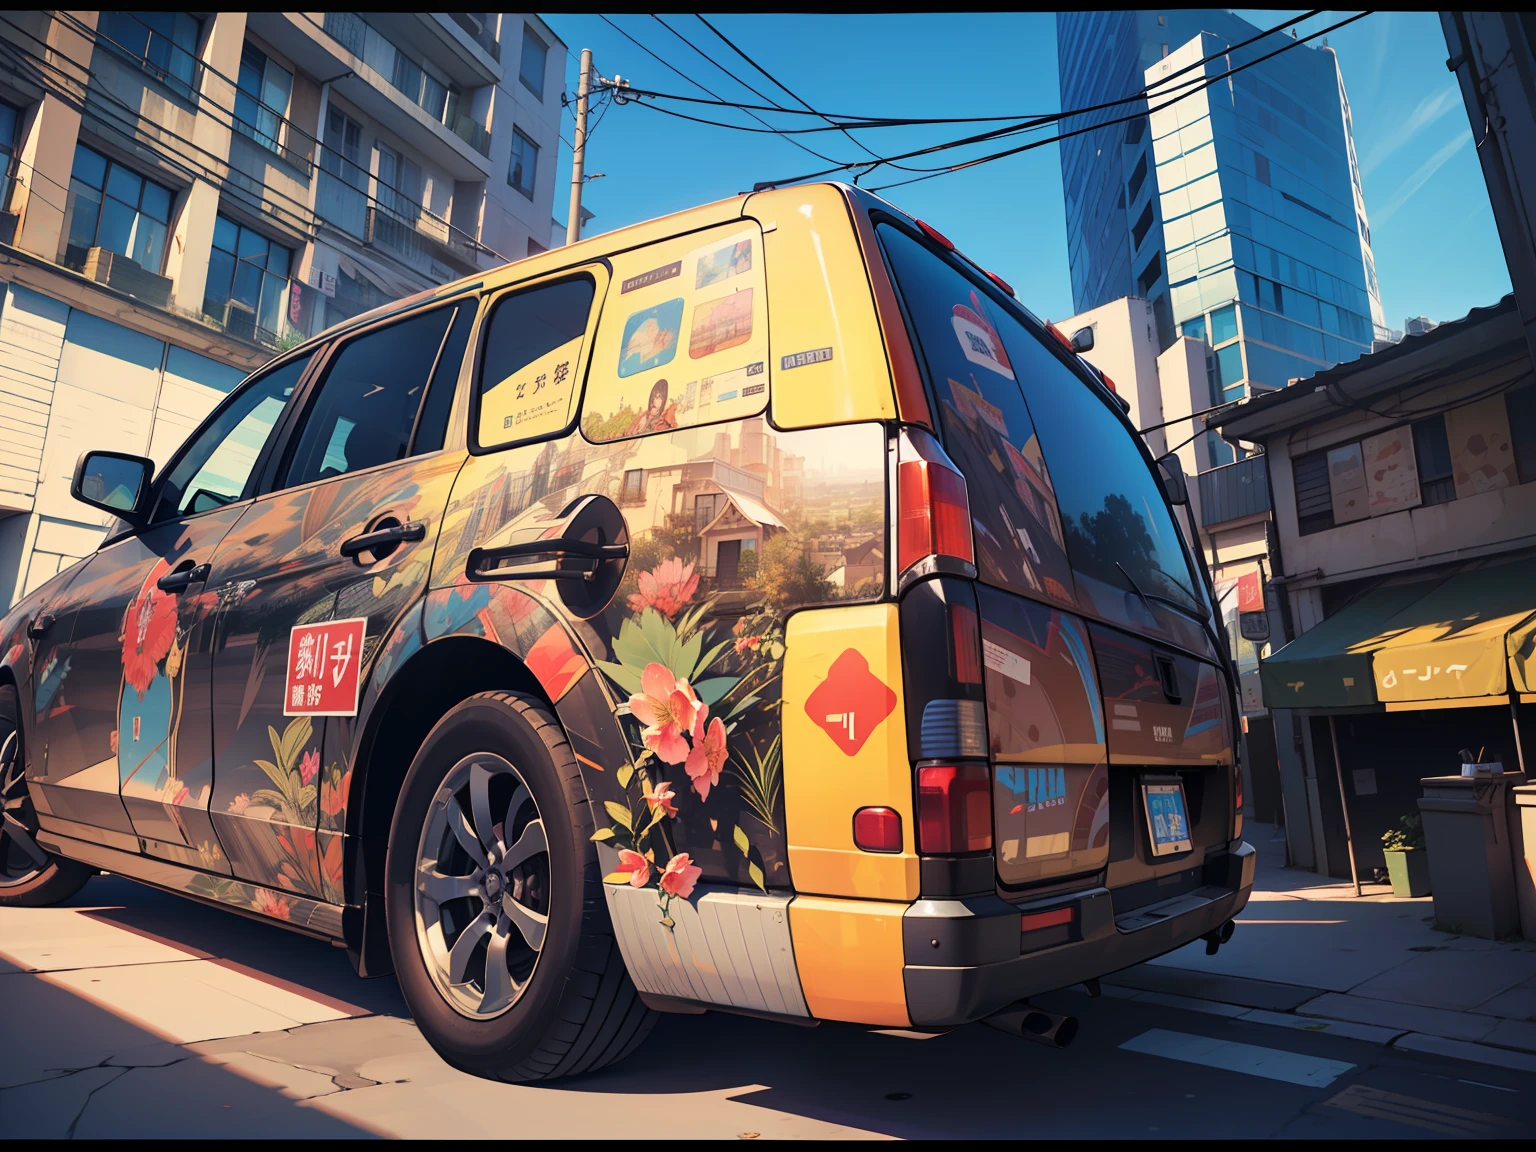 Arafed van with a floral design parked on a city street - SeaArt AI